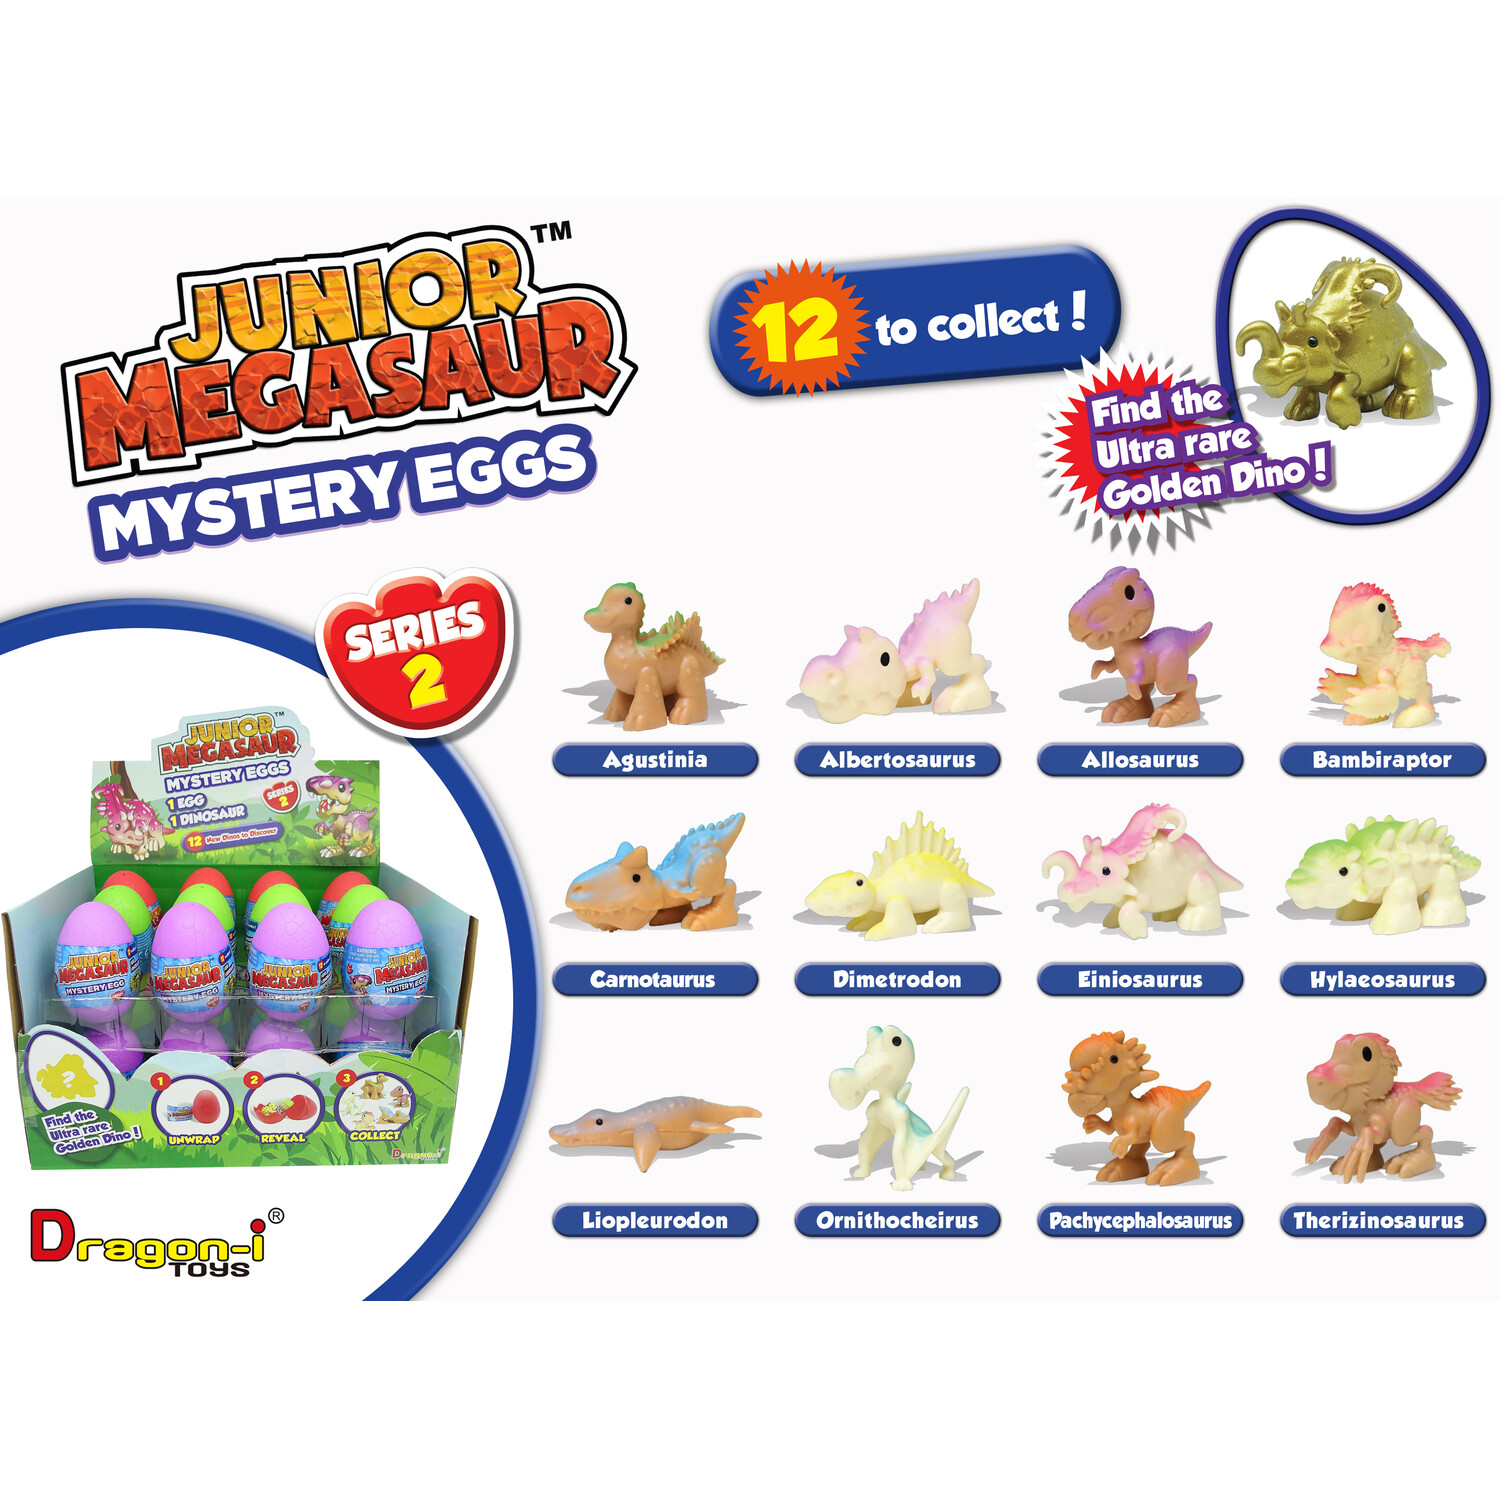 Single Junior Megasaur Mystery Eggs Toy in Assorted styles Image